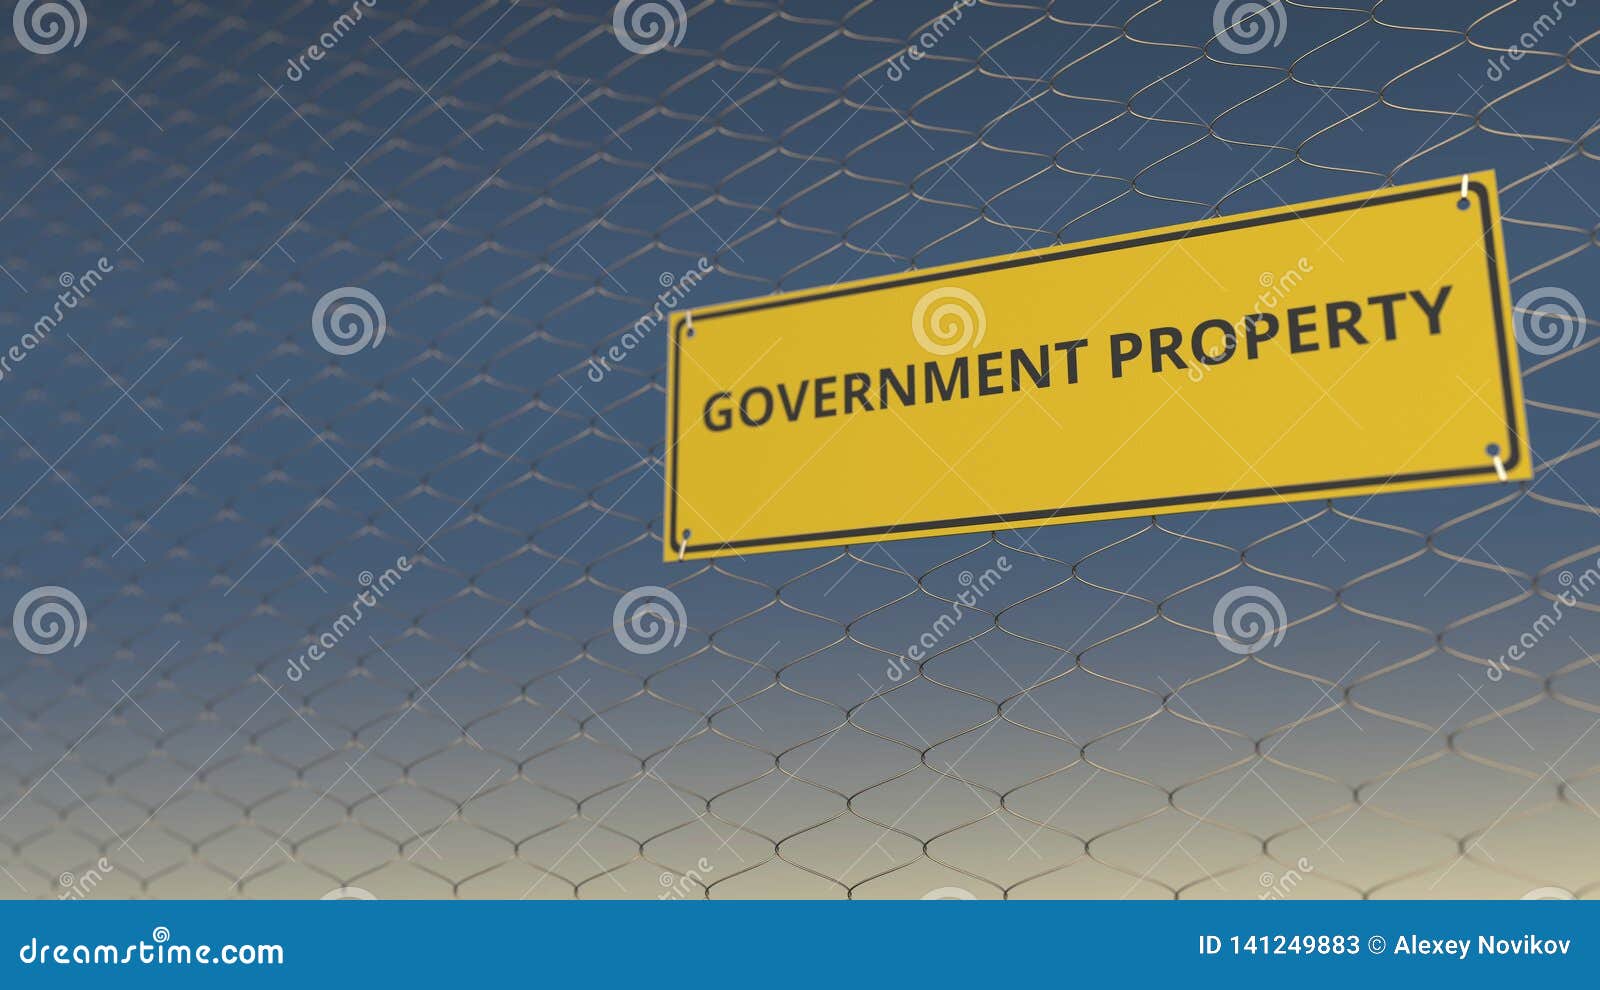 GOVERNMENT PROPERTY Sign An A Mesh Wire Fence Against Blue Sky. 3D ...
